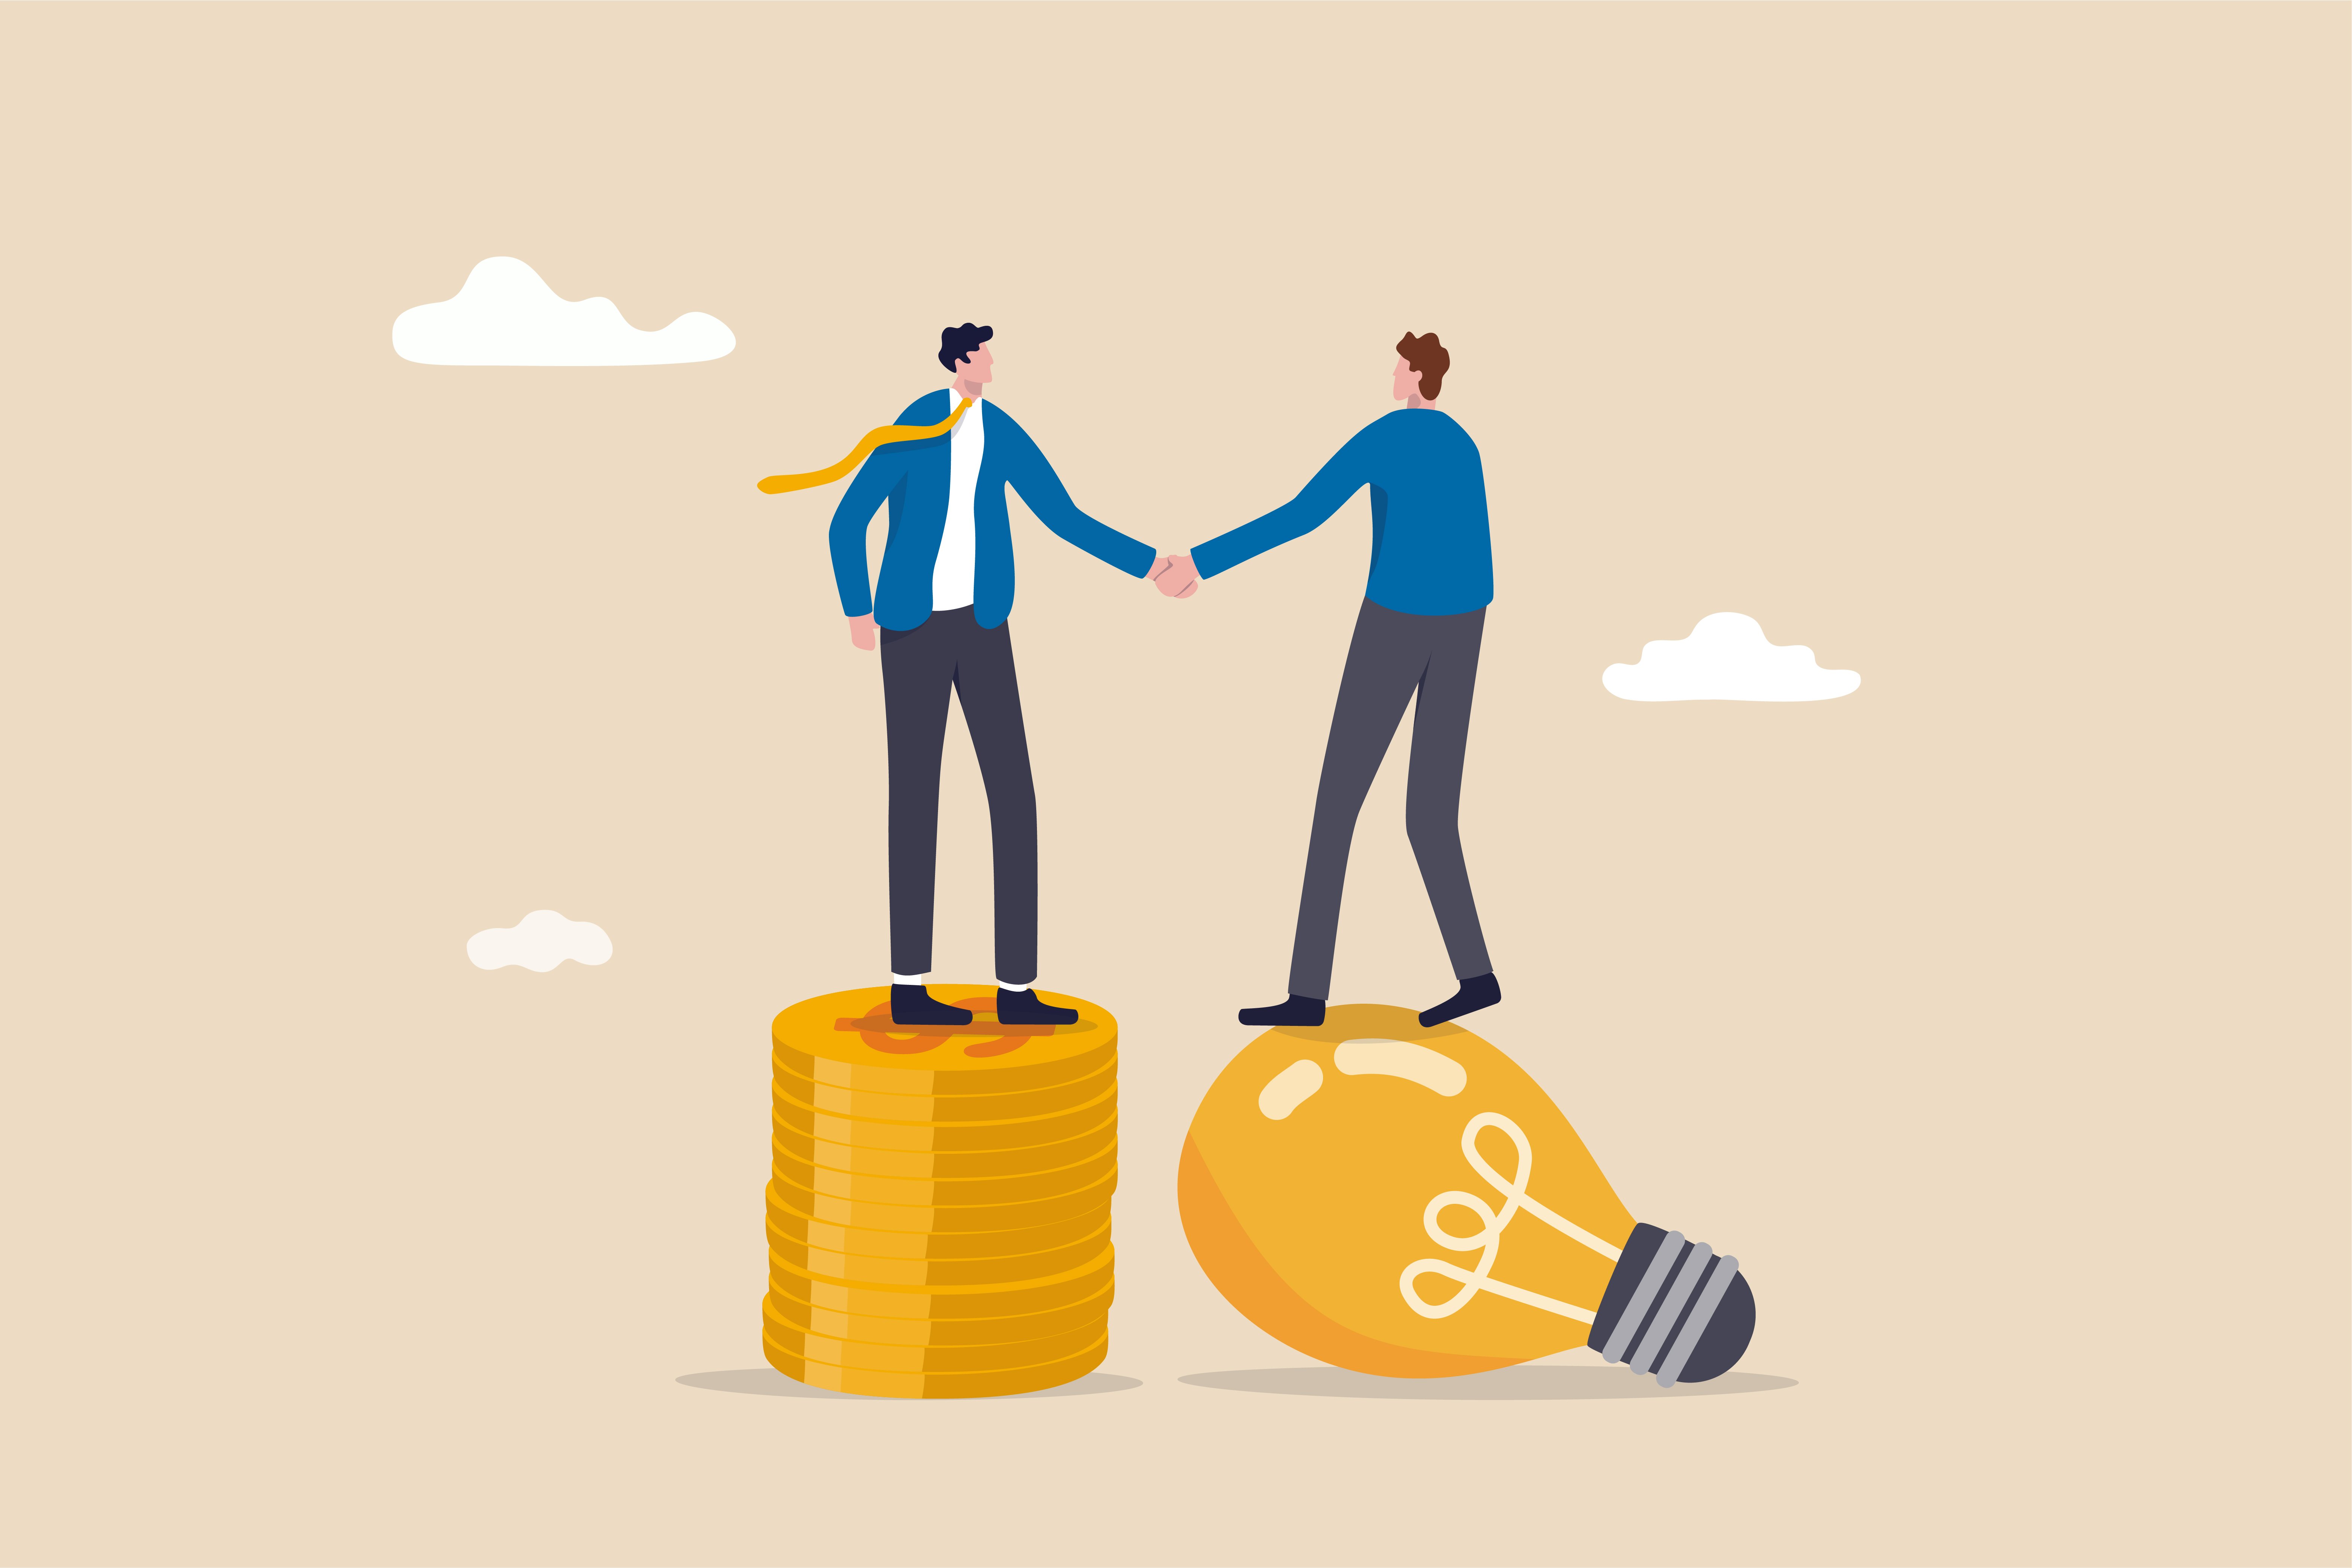 Illustration of two people shaking hands standing on money and a lightbulb